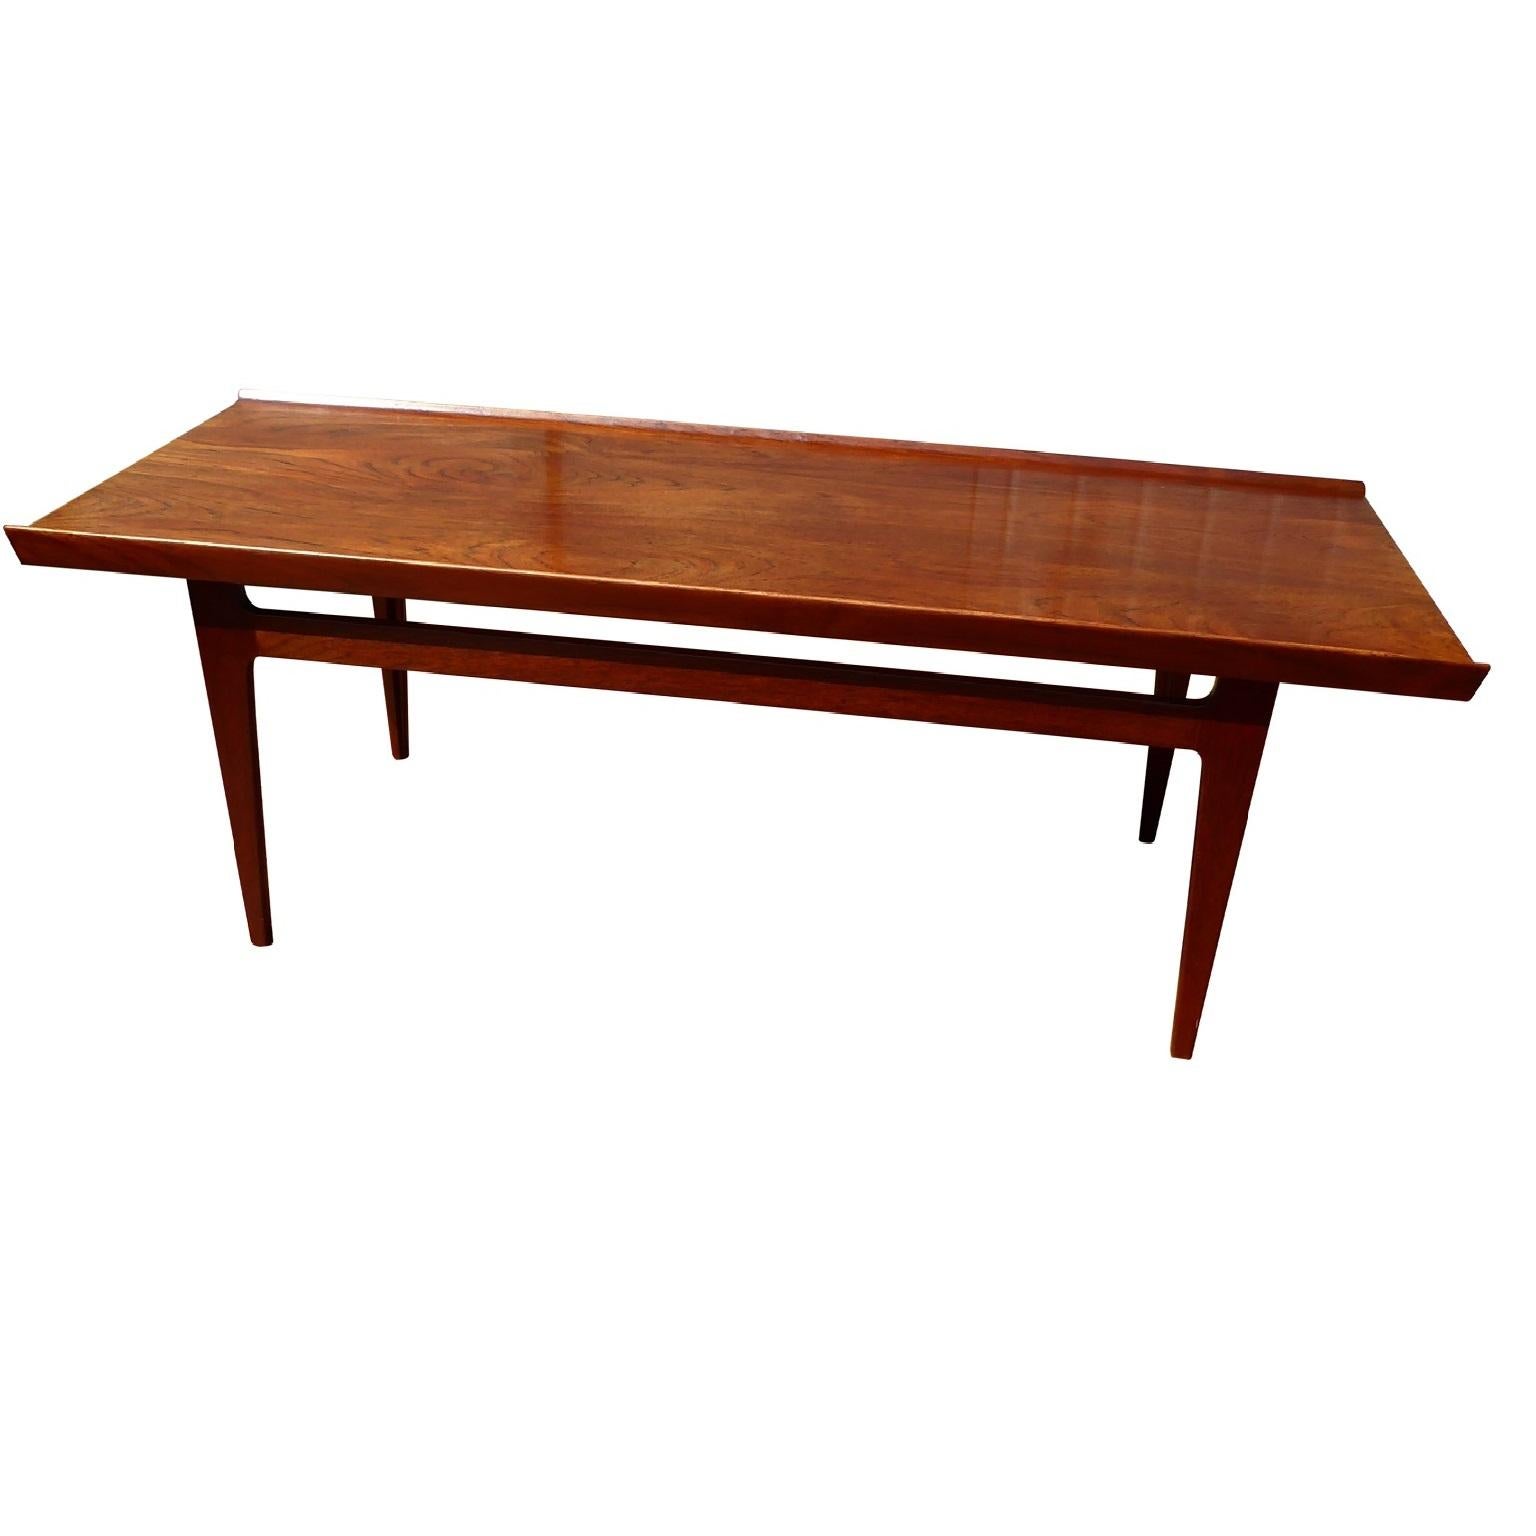 Danish lounge or coffee table designed by Finn Juhl and produced by France & Son,
Model # 532, circa 1959. In fantastic condition.

The rectangular lounge table is solid teak, with signature raised edges along the length of the table, as well as